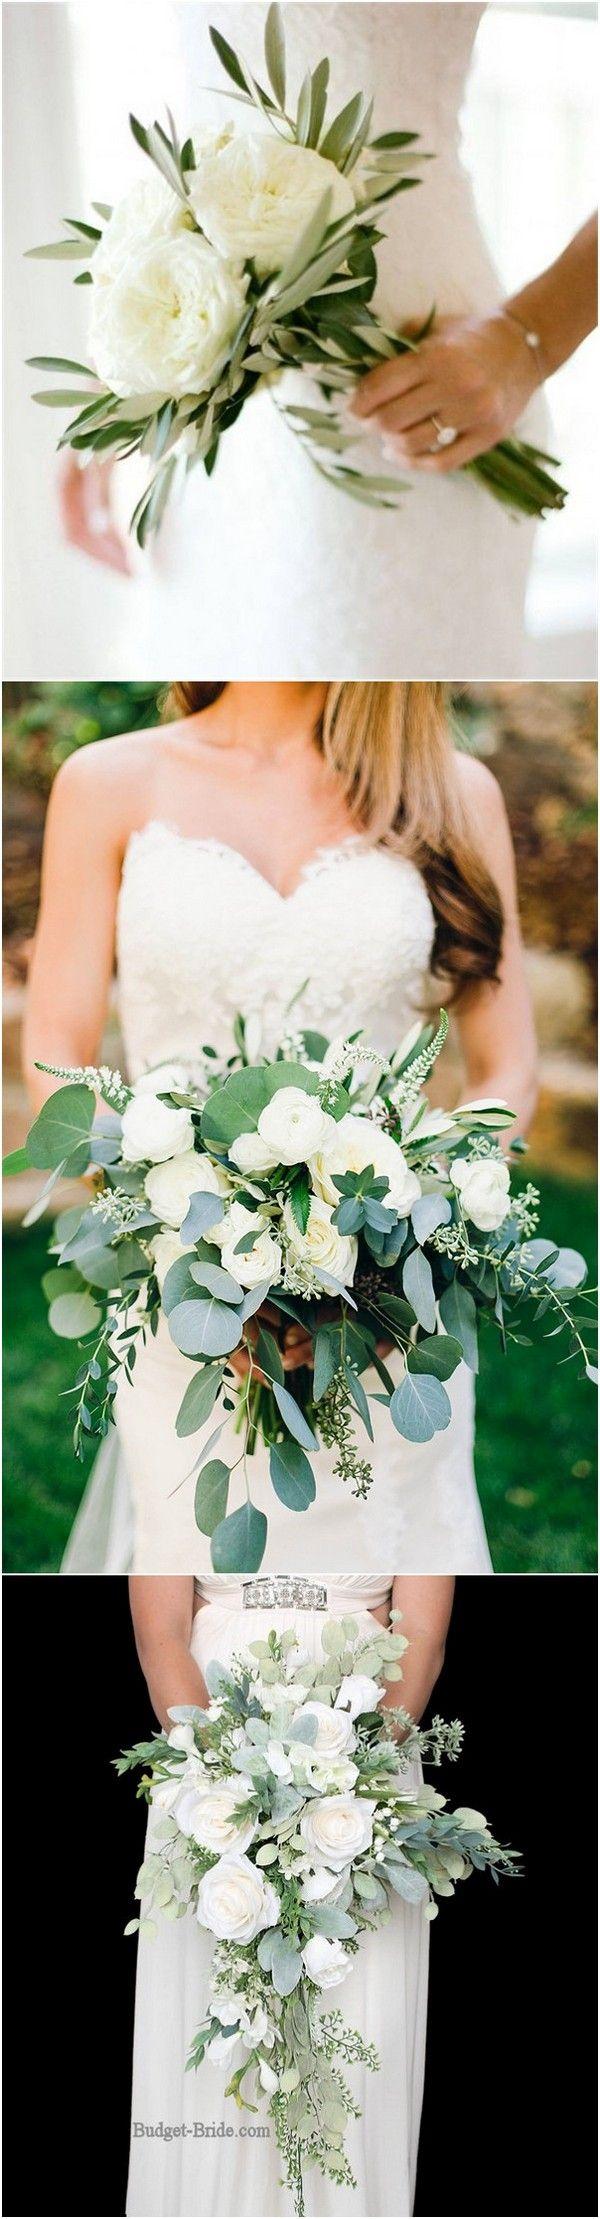 Mariage - Top 10 White And Green Wedding Bouquet Ideas You’ll Love - Page 2 Of 2